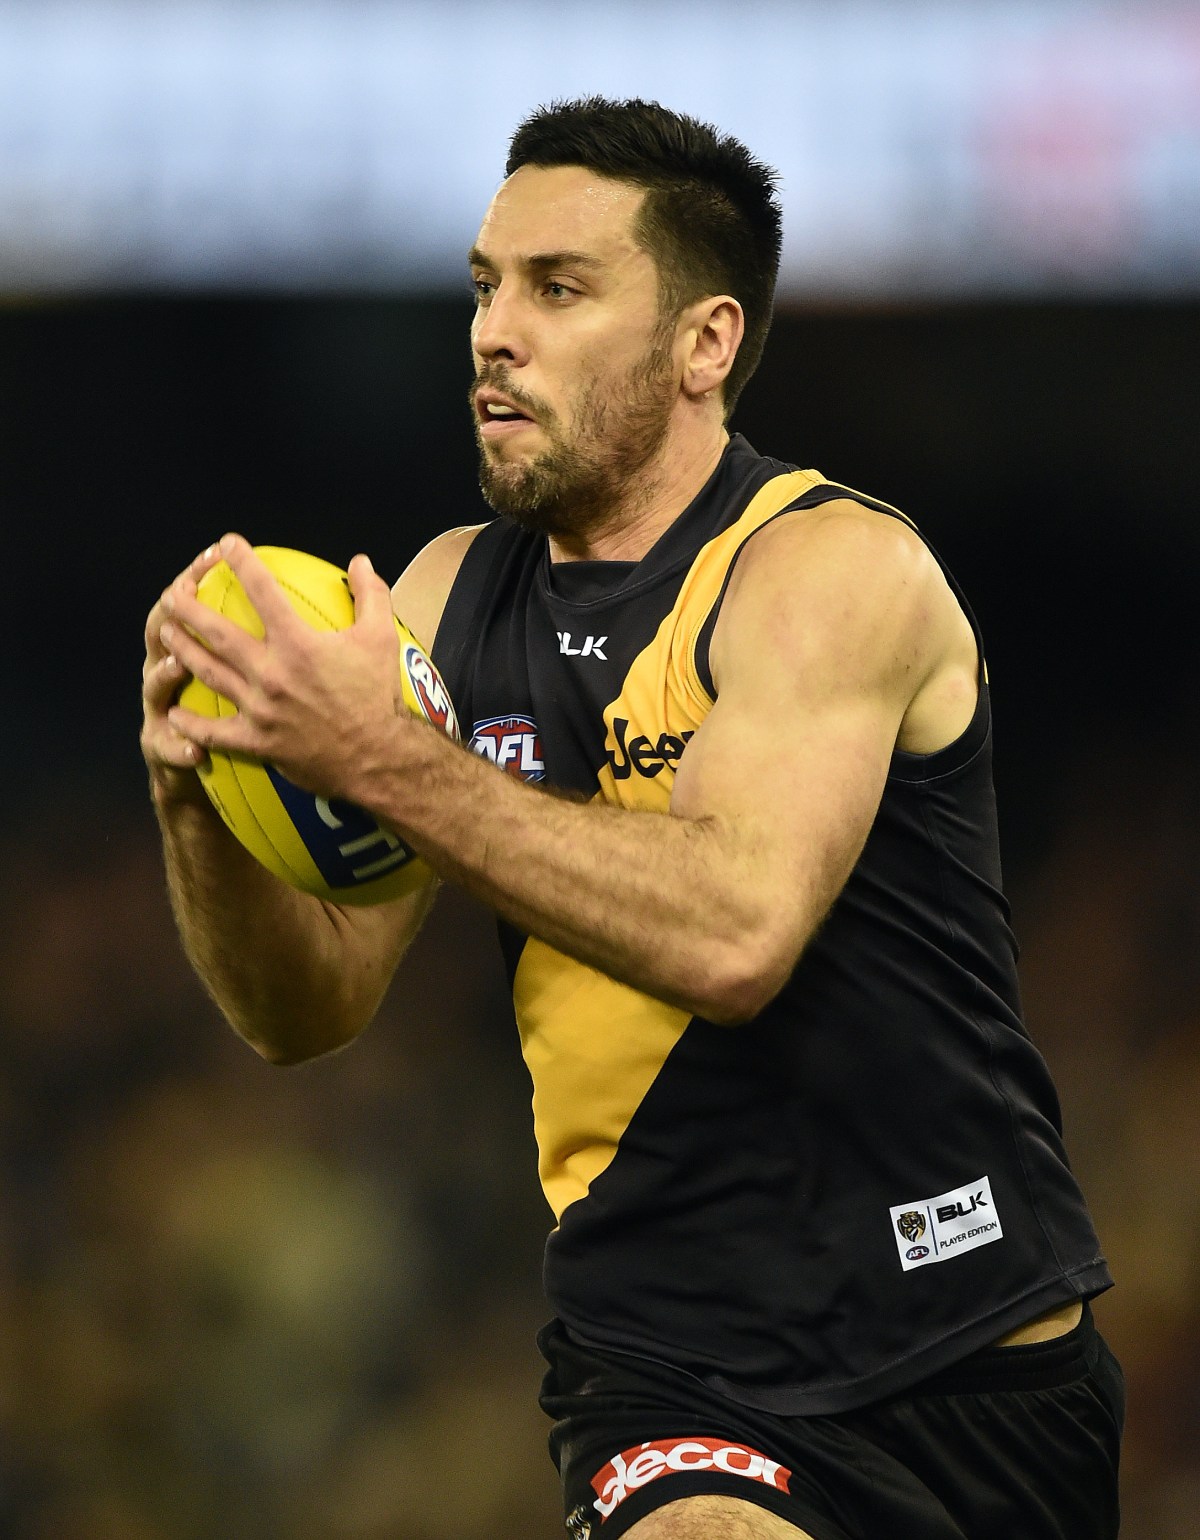 Richmond Tigers player Troy Chaplin possess the ball against the North Melbourne Kangaroos in round 23 of the AFL at Etihad Stadium, Friday, Sept. 4, 2015. (AAP Image/Julian Smith) NO ARCHIVING, EDITORIAL USE ONLY